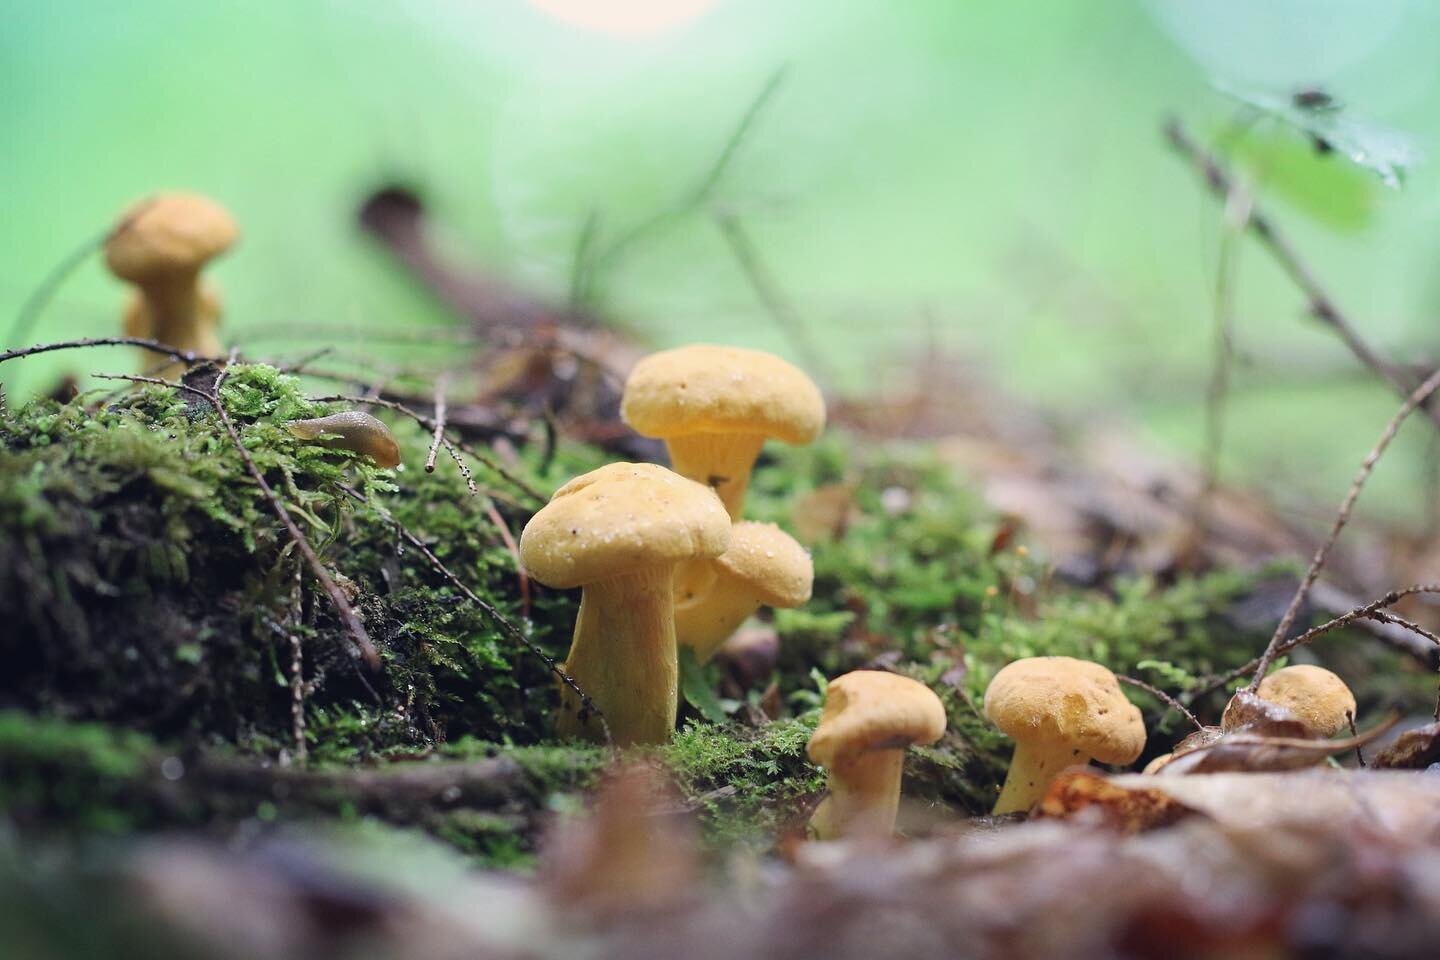 Golden chanterelles, classic summer wild mushrooms, have arrived early this year in Vermont. Check out the link in our profile to read Ari&rsquo;s latest post ✨ Happy Summer Solstice!